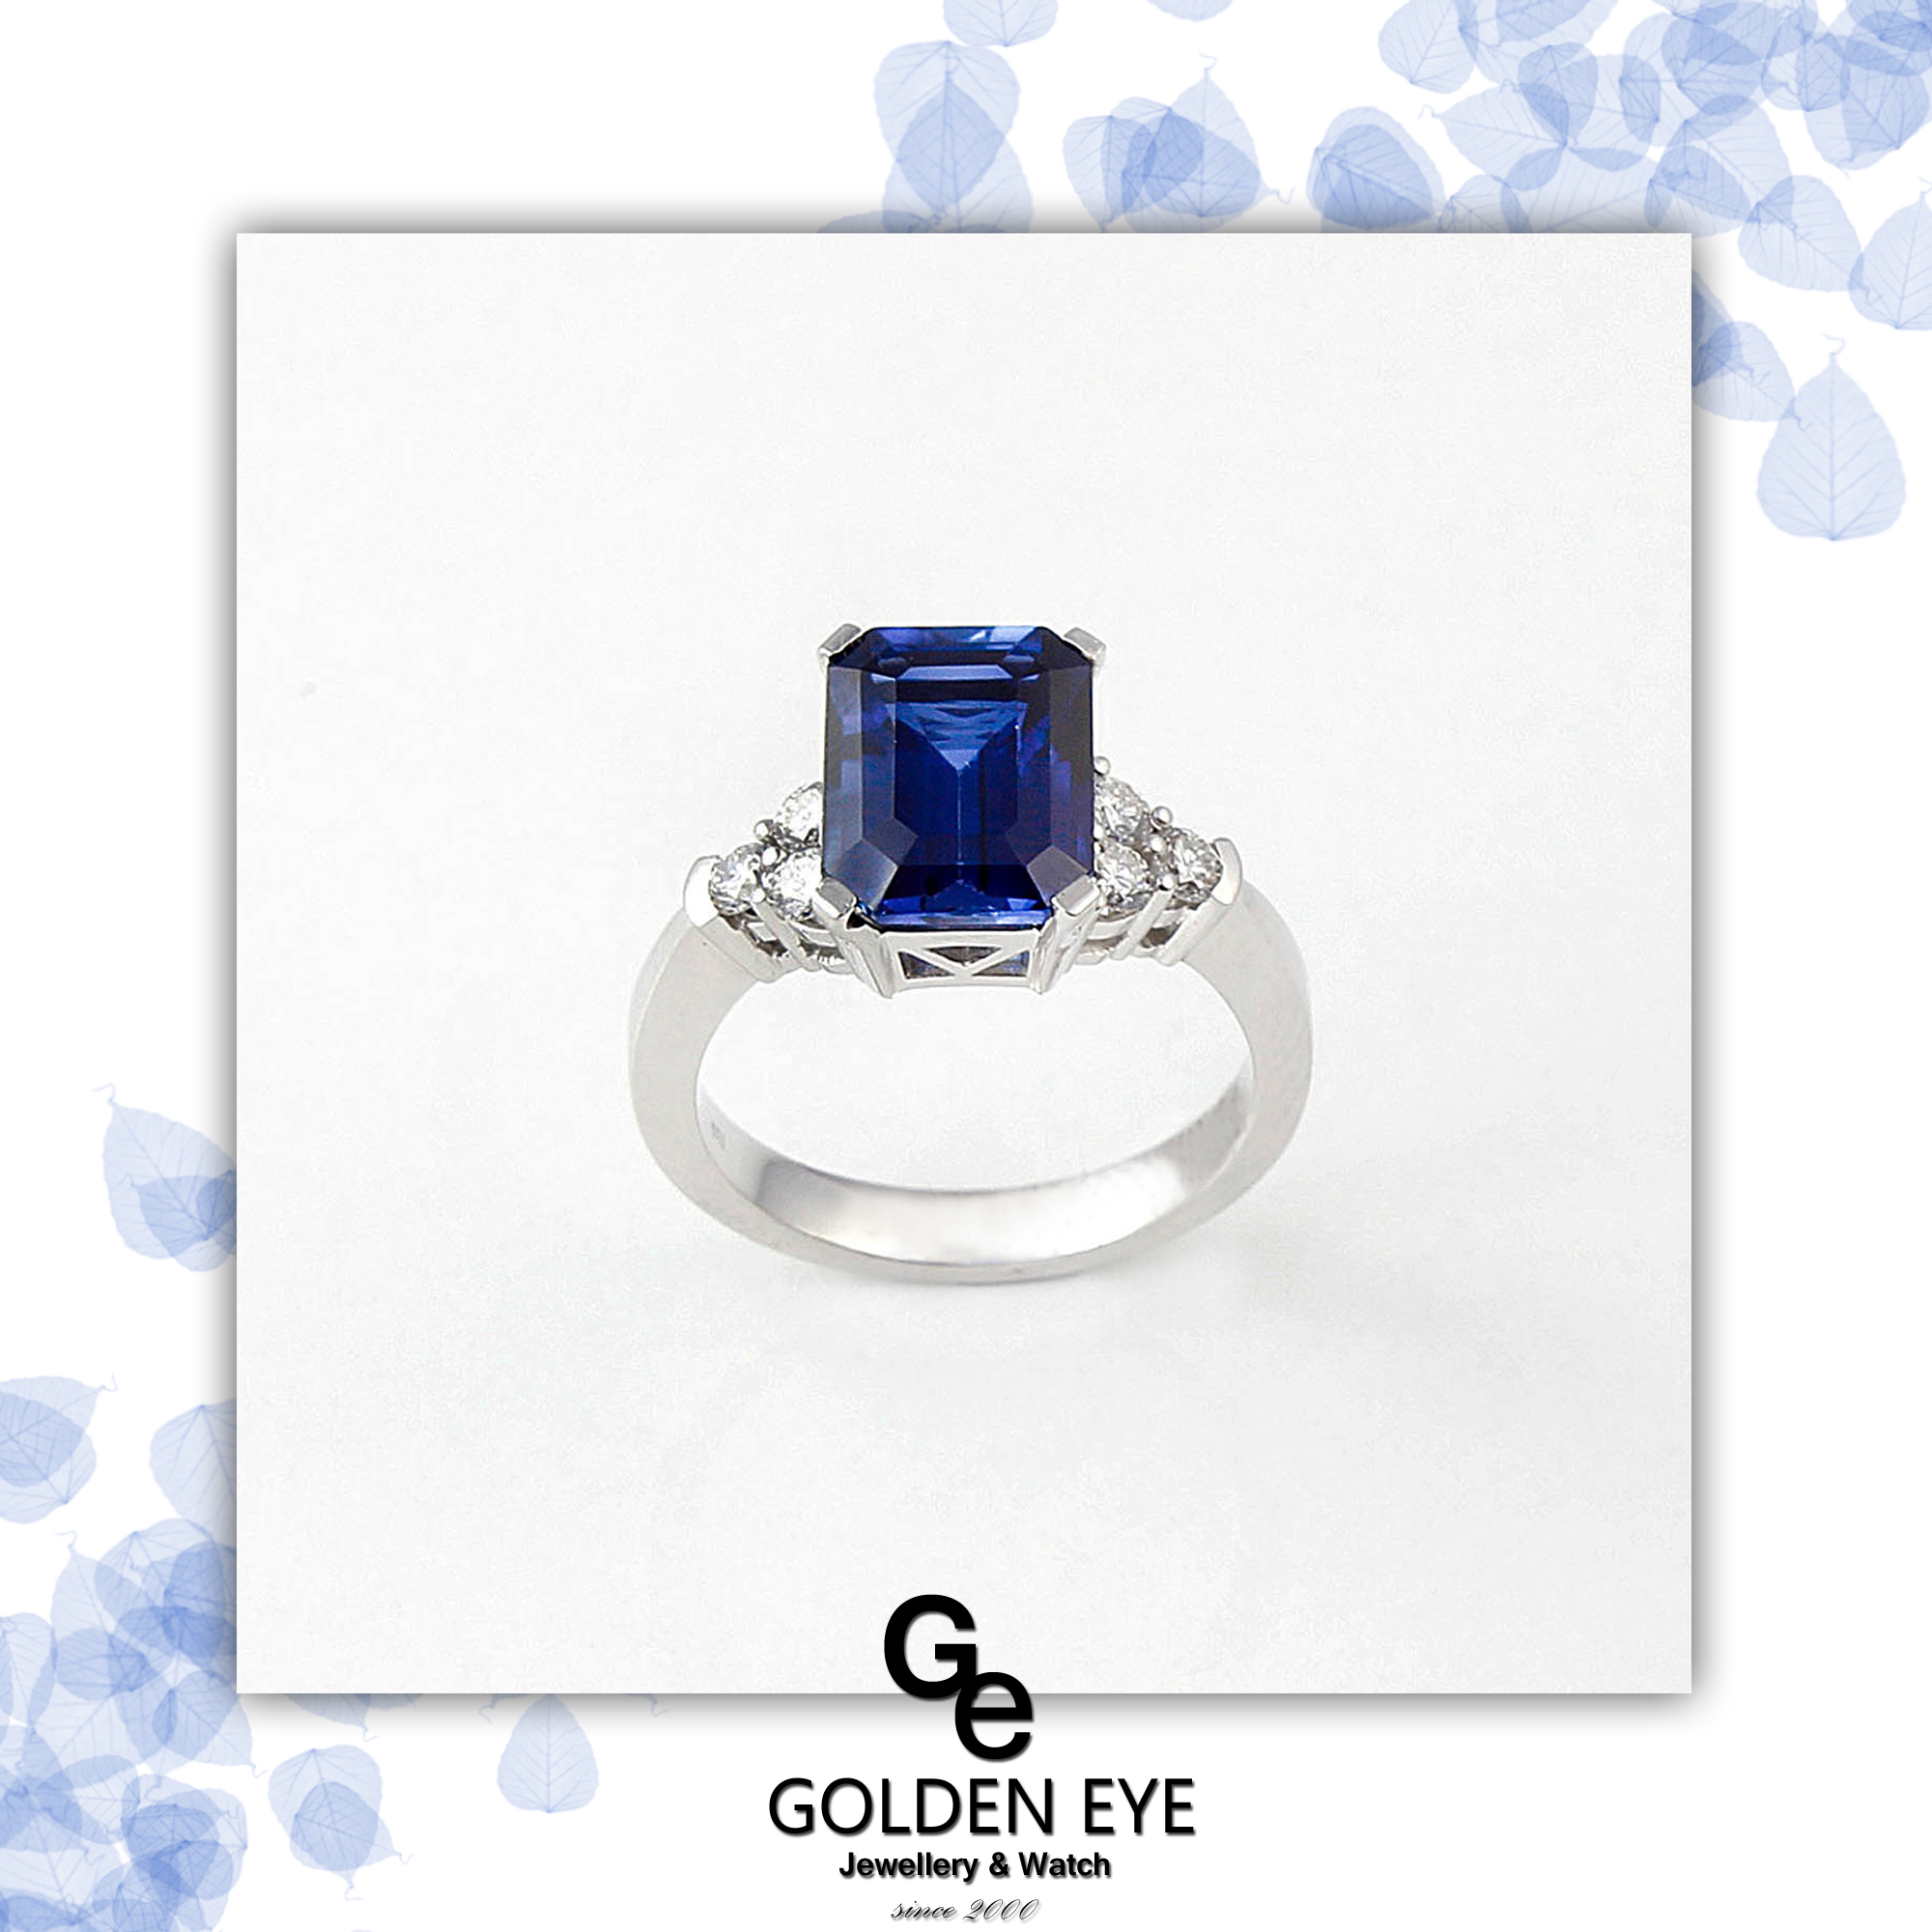 R033A White Gold Ring with Blue Saphire and Diamonds